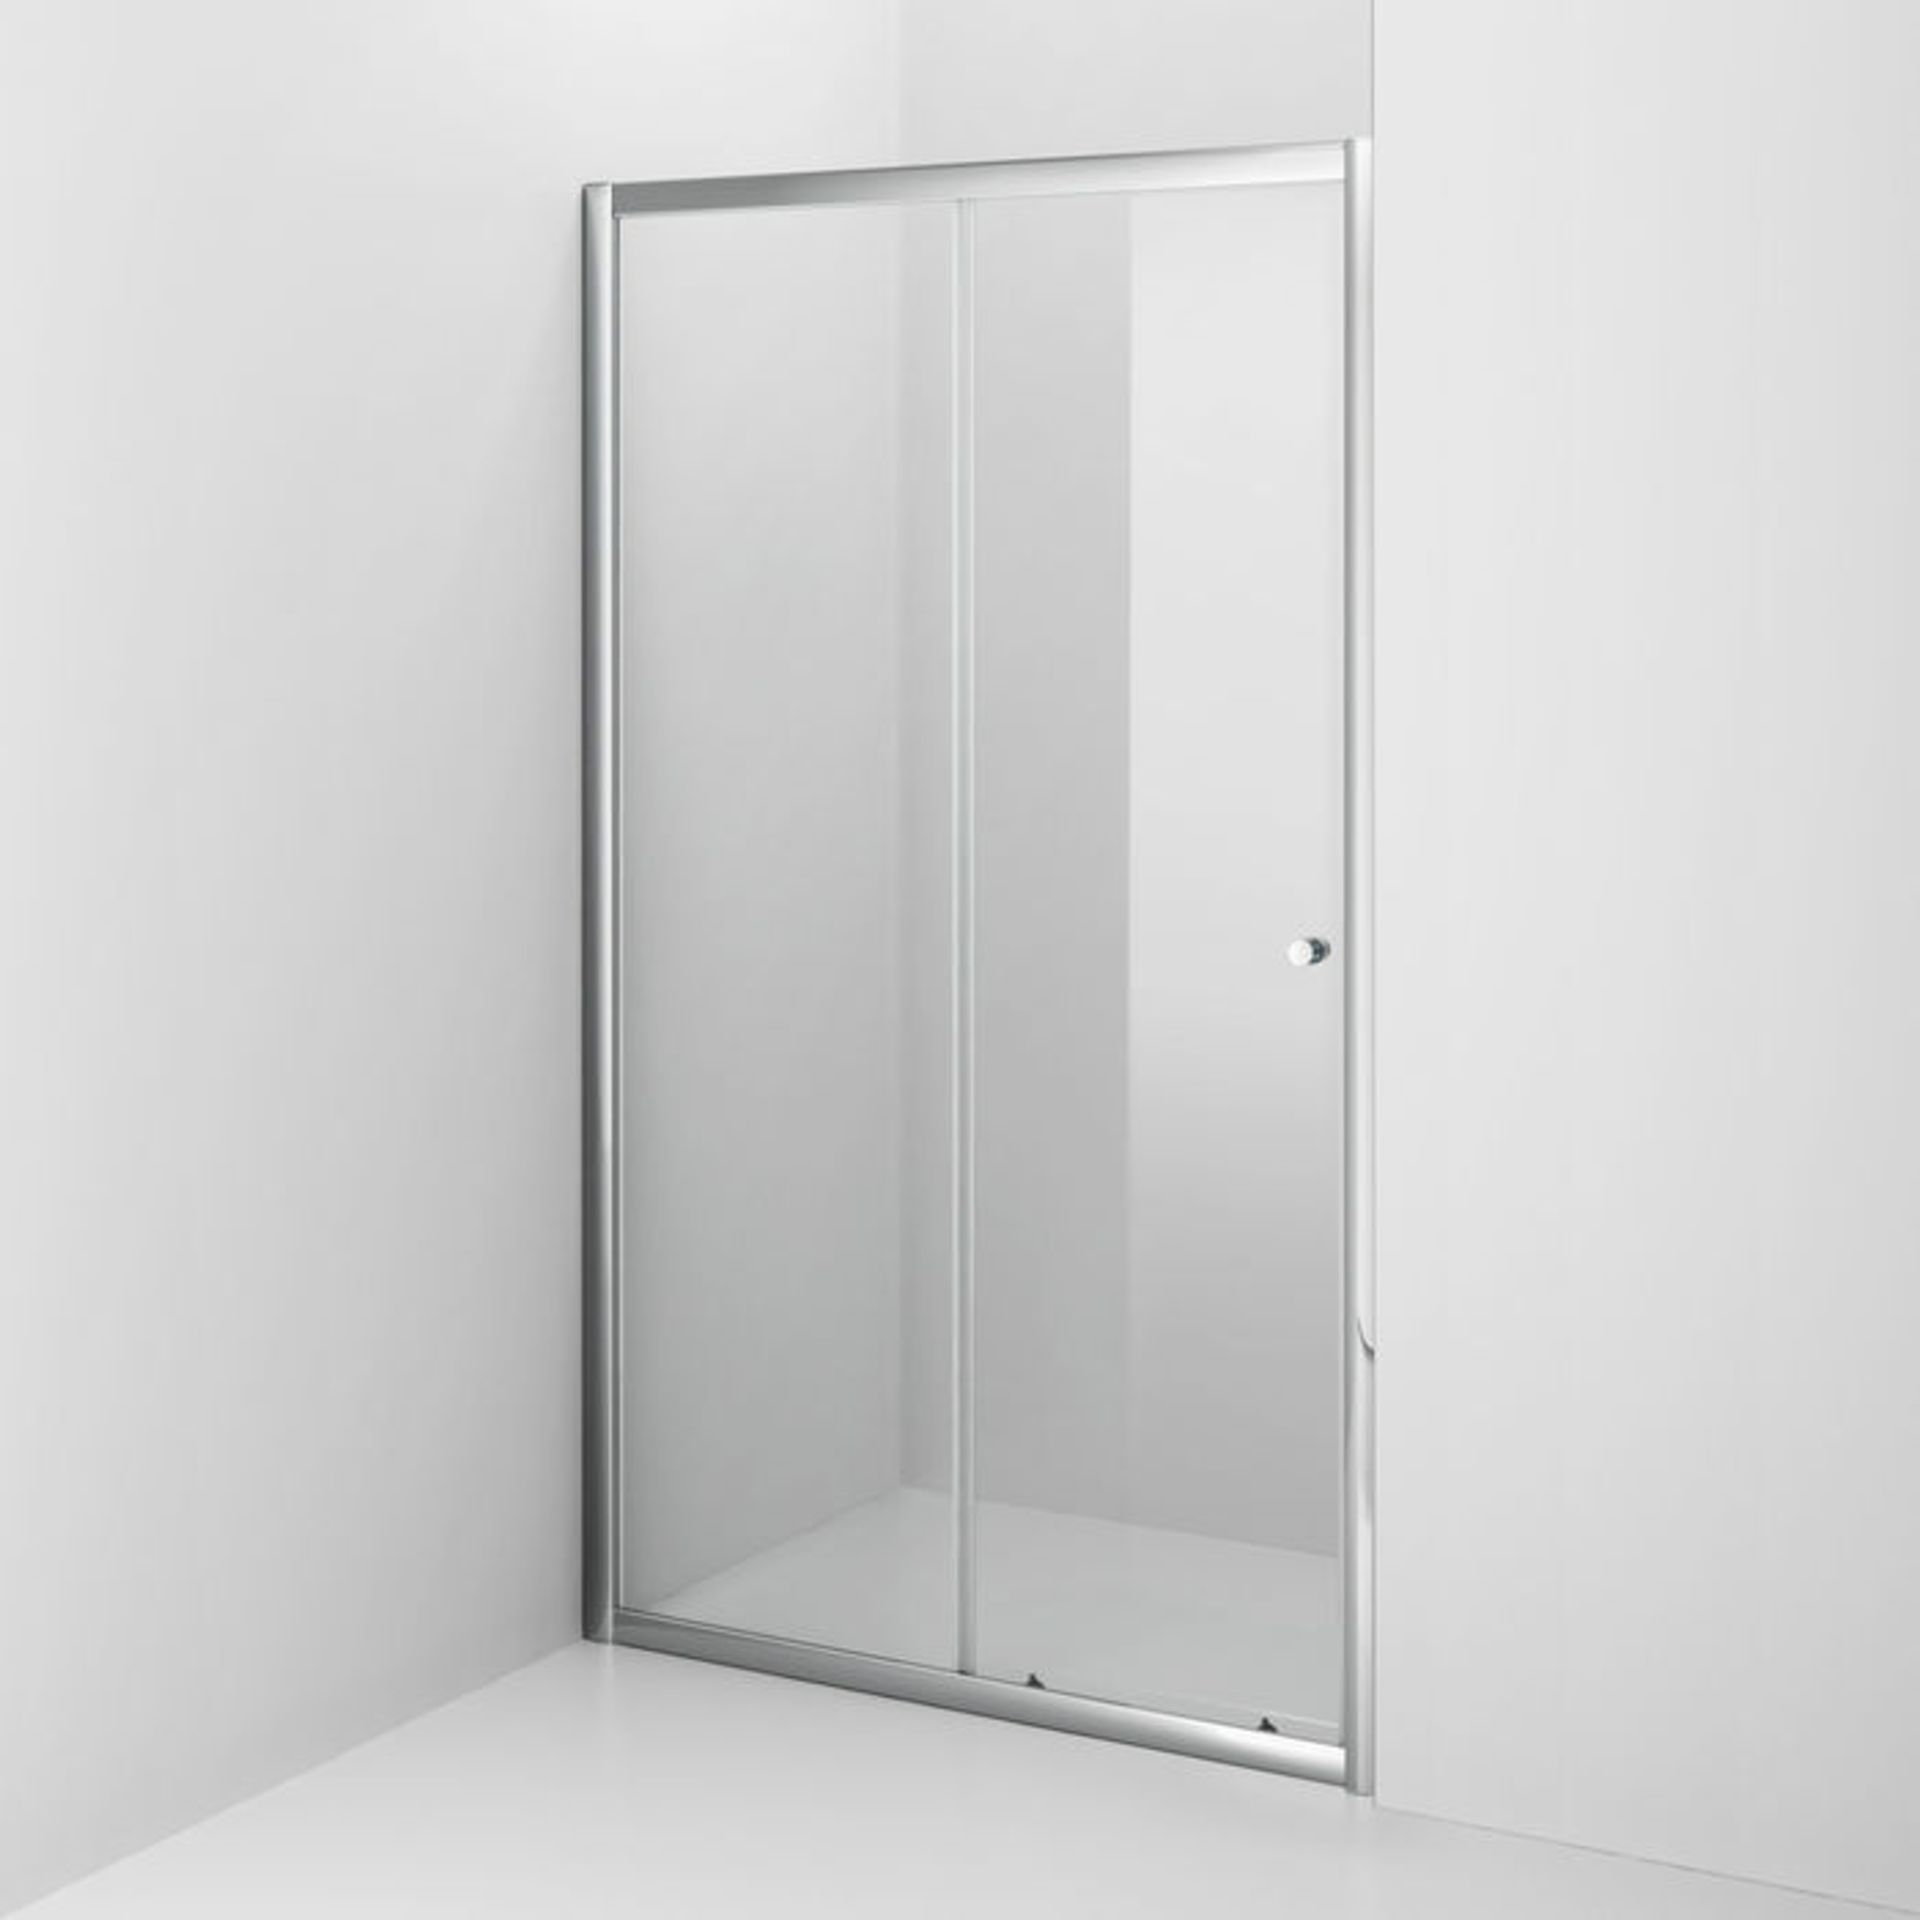 NEW Twyfords 1200mm - Elements Sliding Shower Door. RRP £399.99.4mm Safety Glass Fully waterp... - Image 3 of 3